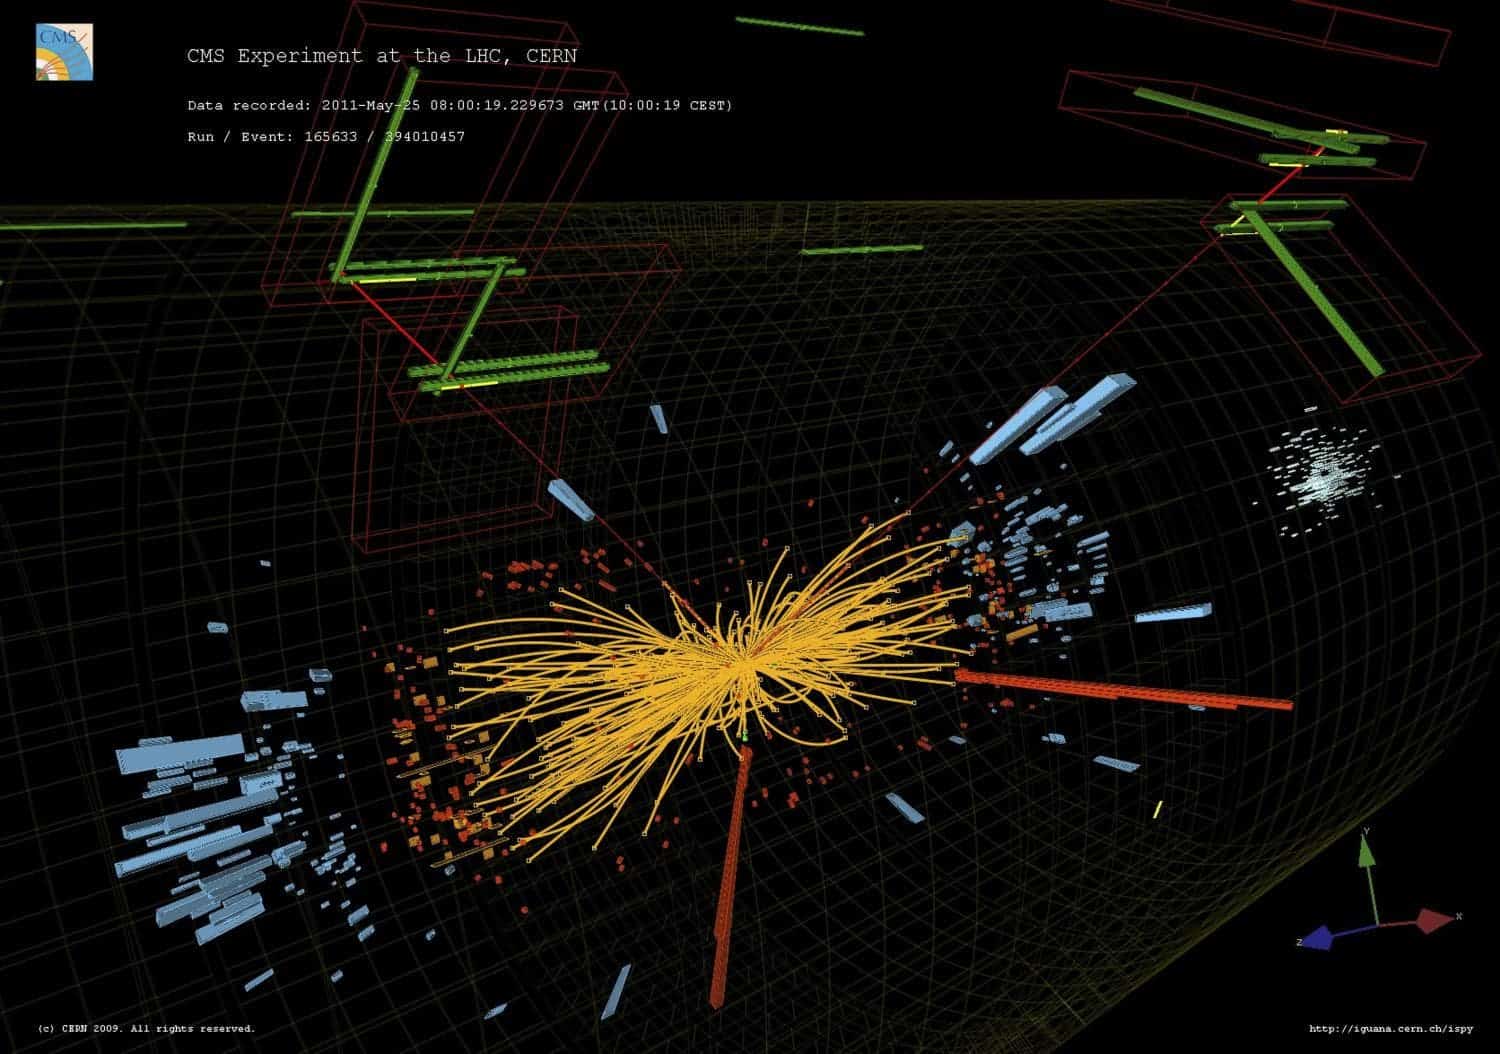 Proton-proton collisions events in which 2 high energy electrons and two high energy muons are observed. 
Image credits Taylor L, McCauley T/CERN.